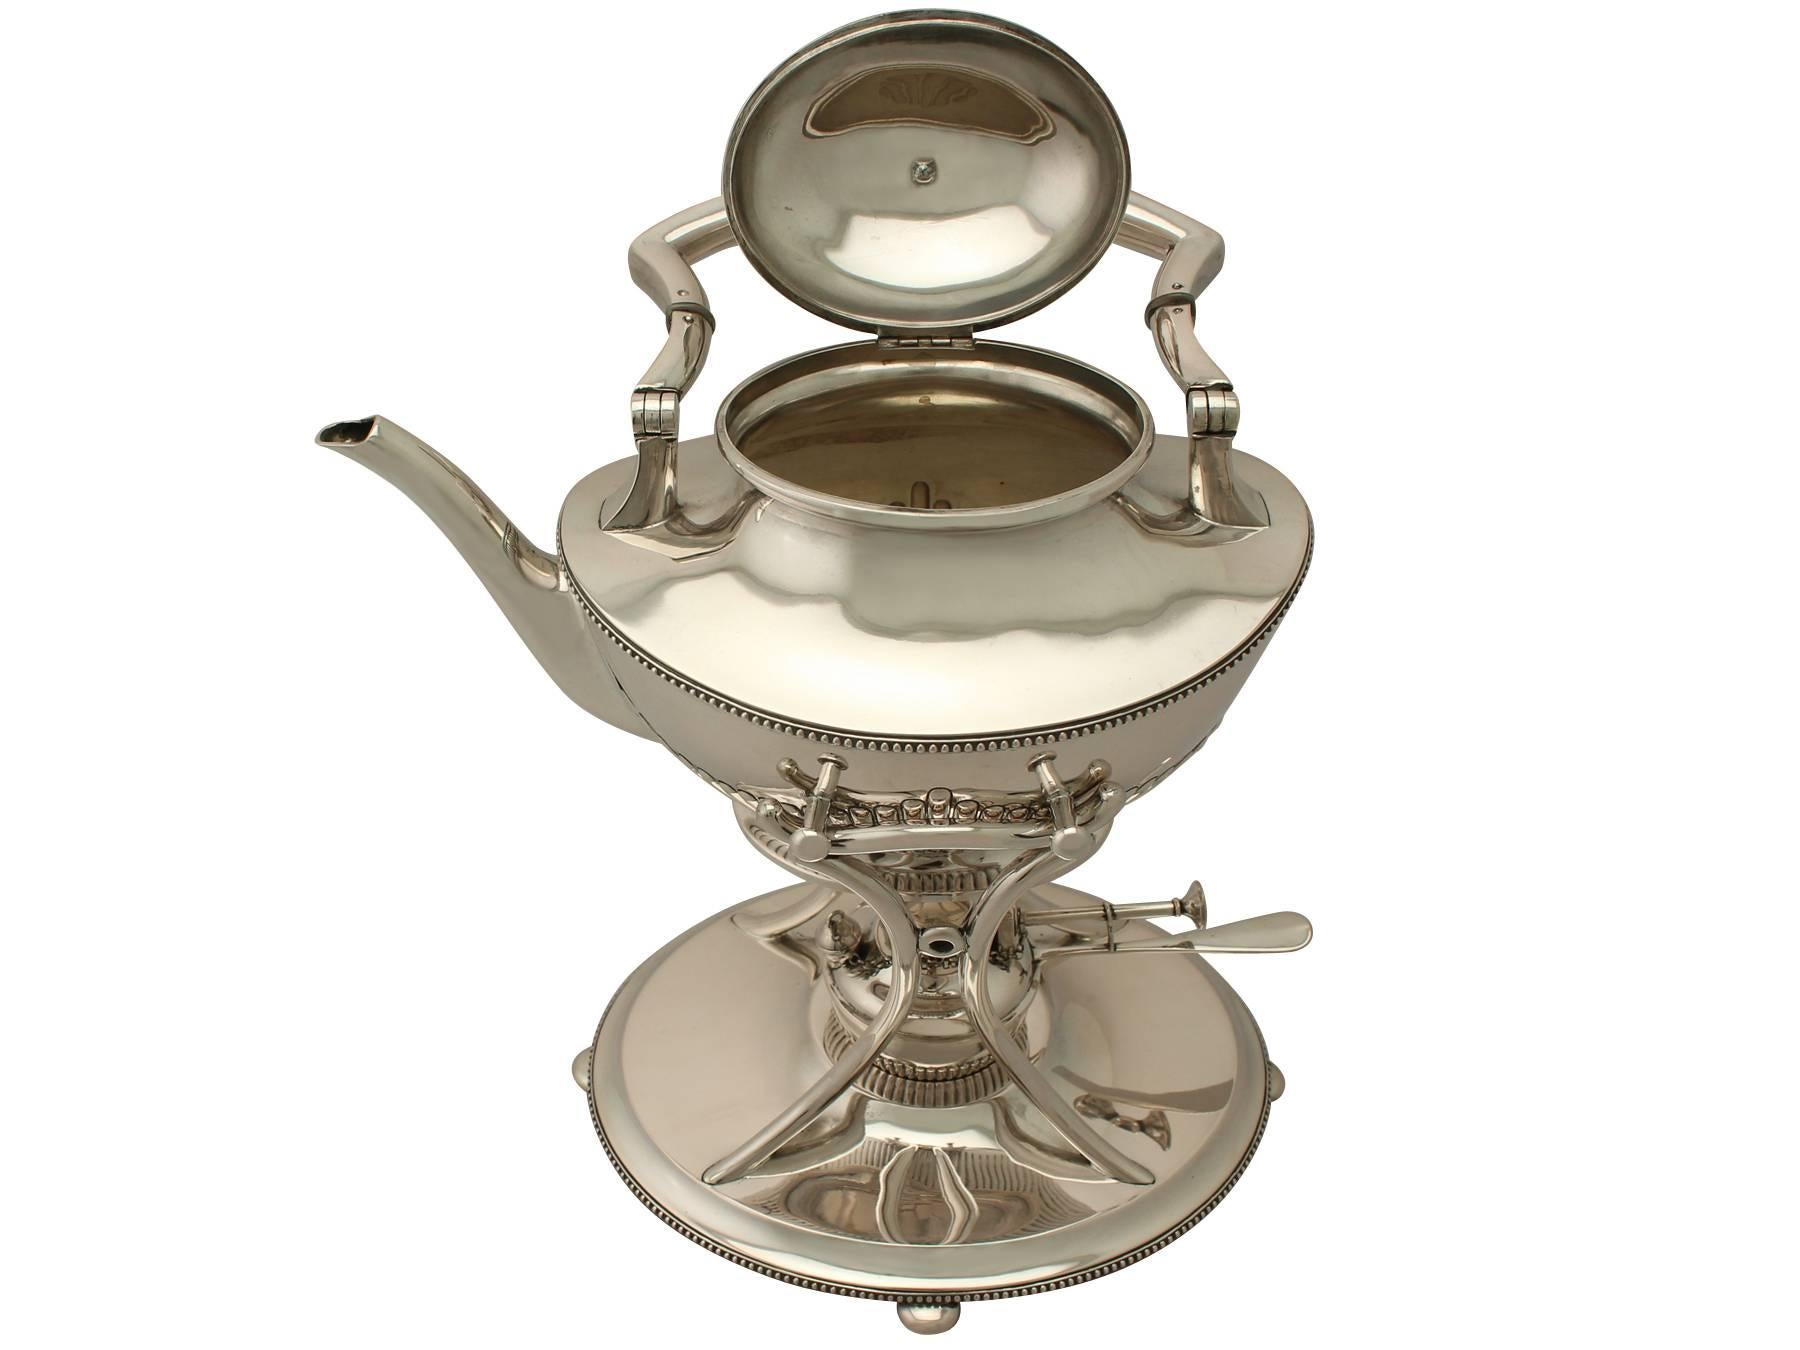 An exceptional, fine and impressive antique German silver spirit kettle on stand in the Queen Anne style; an addition to our antique silver tea ware collection.

This exceptional antique German silver spirit kettle has a plain oval rounded form